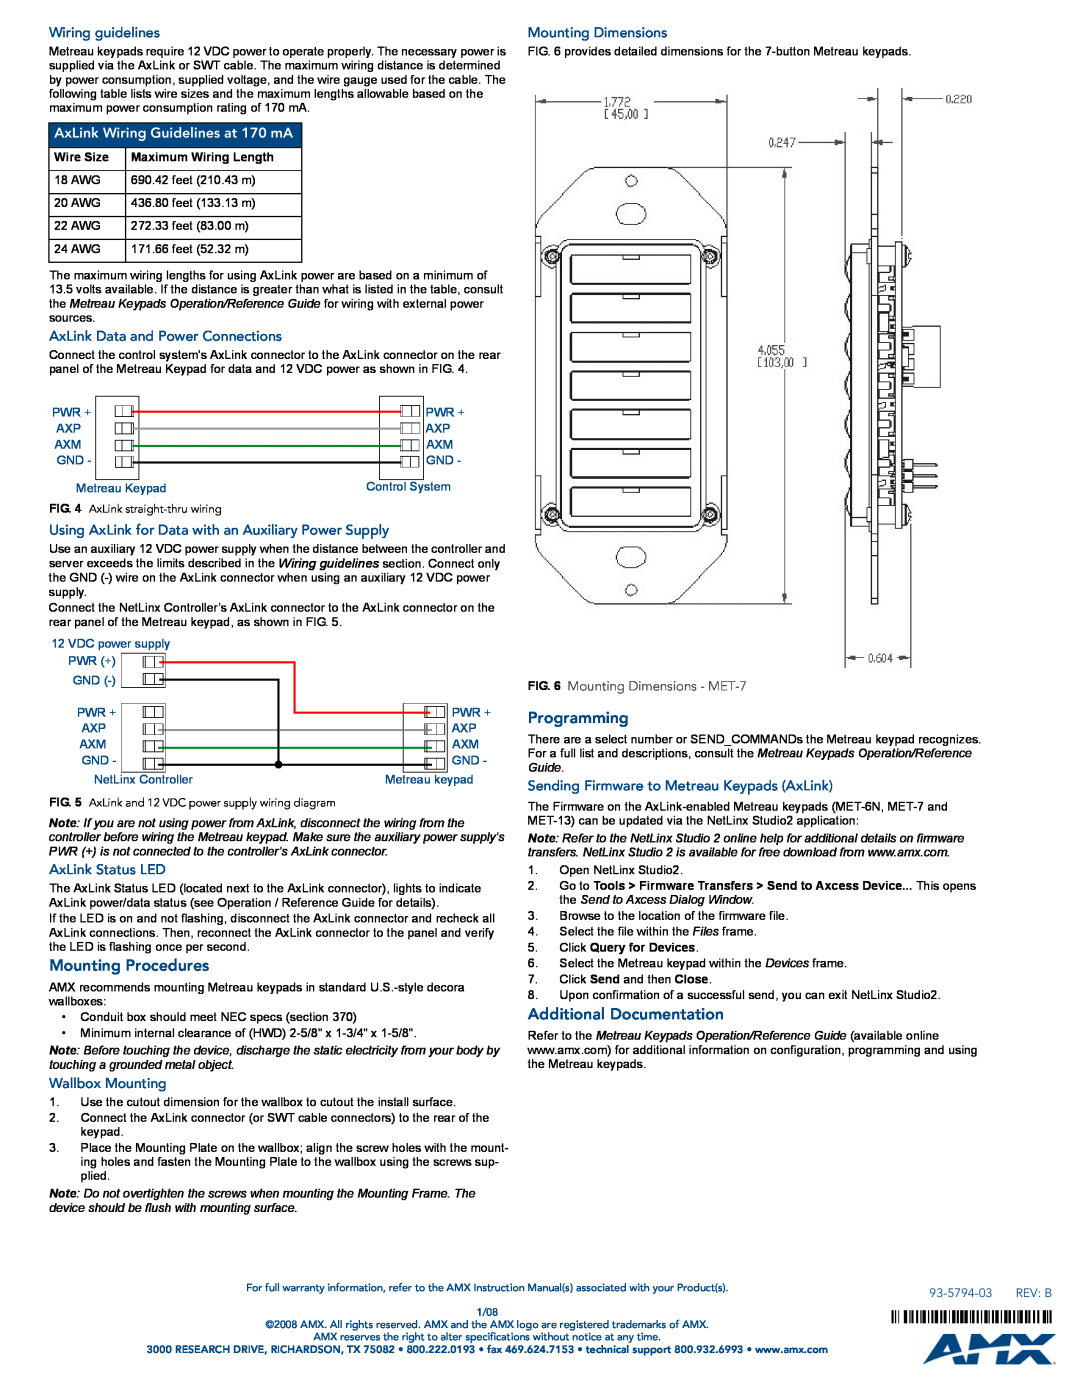 AMX MET-7 Mounting Procedures, Programming, Additional Documentation, Wiring guidelines, AxLink Data and Power Connections 